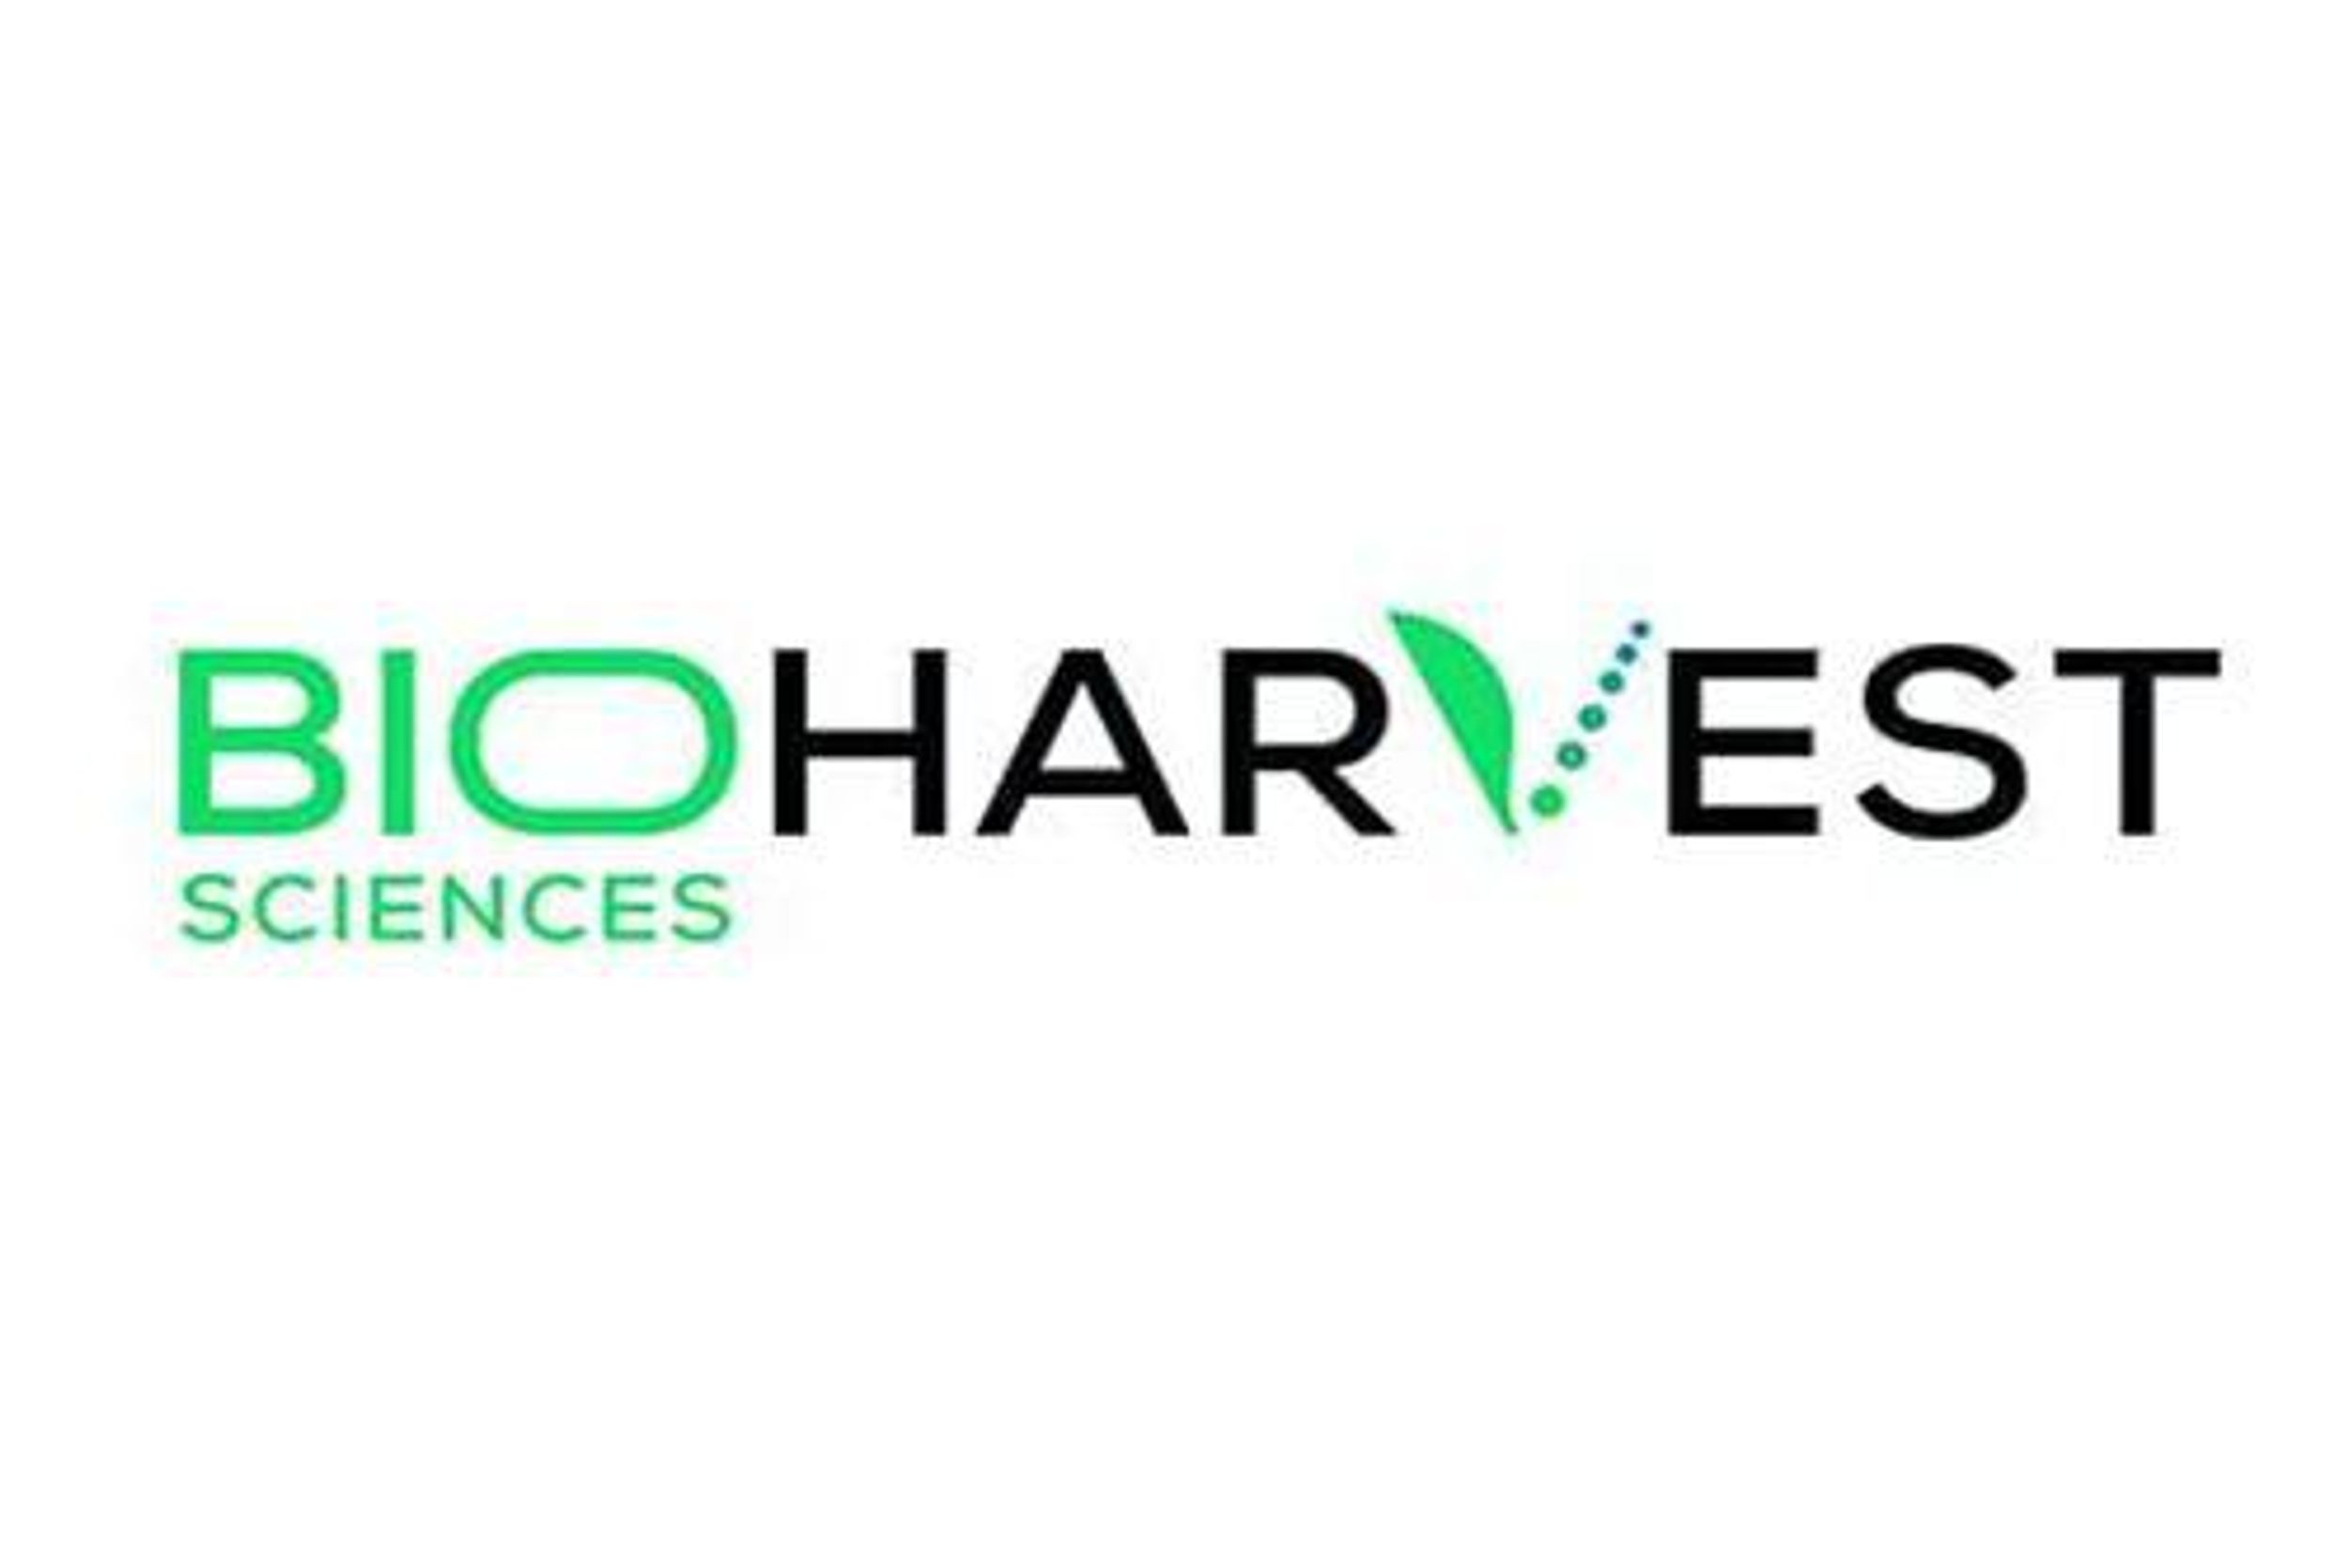 BioHarvest Sciences Inc. Plans to Build a Production Facility in Ontario to Serve the Canadian Market with Unique Cannabis Products